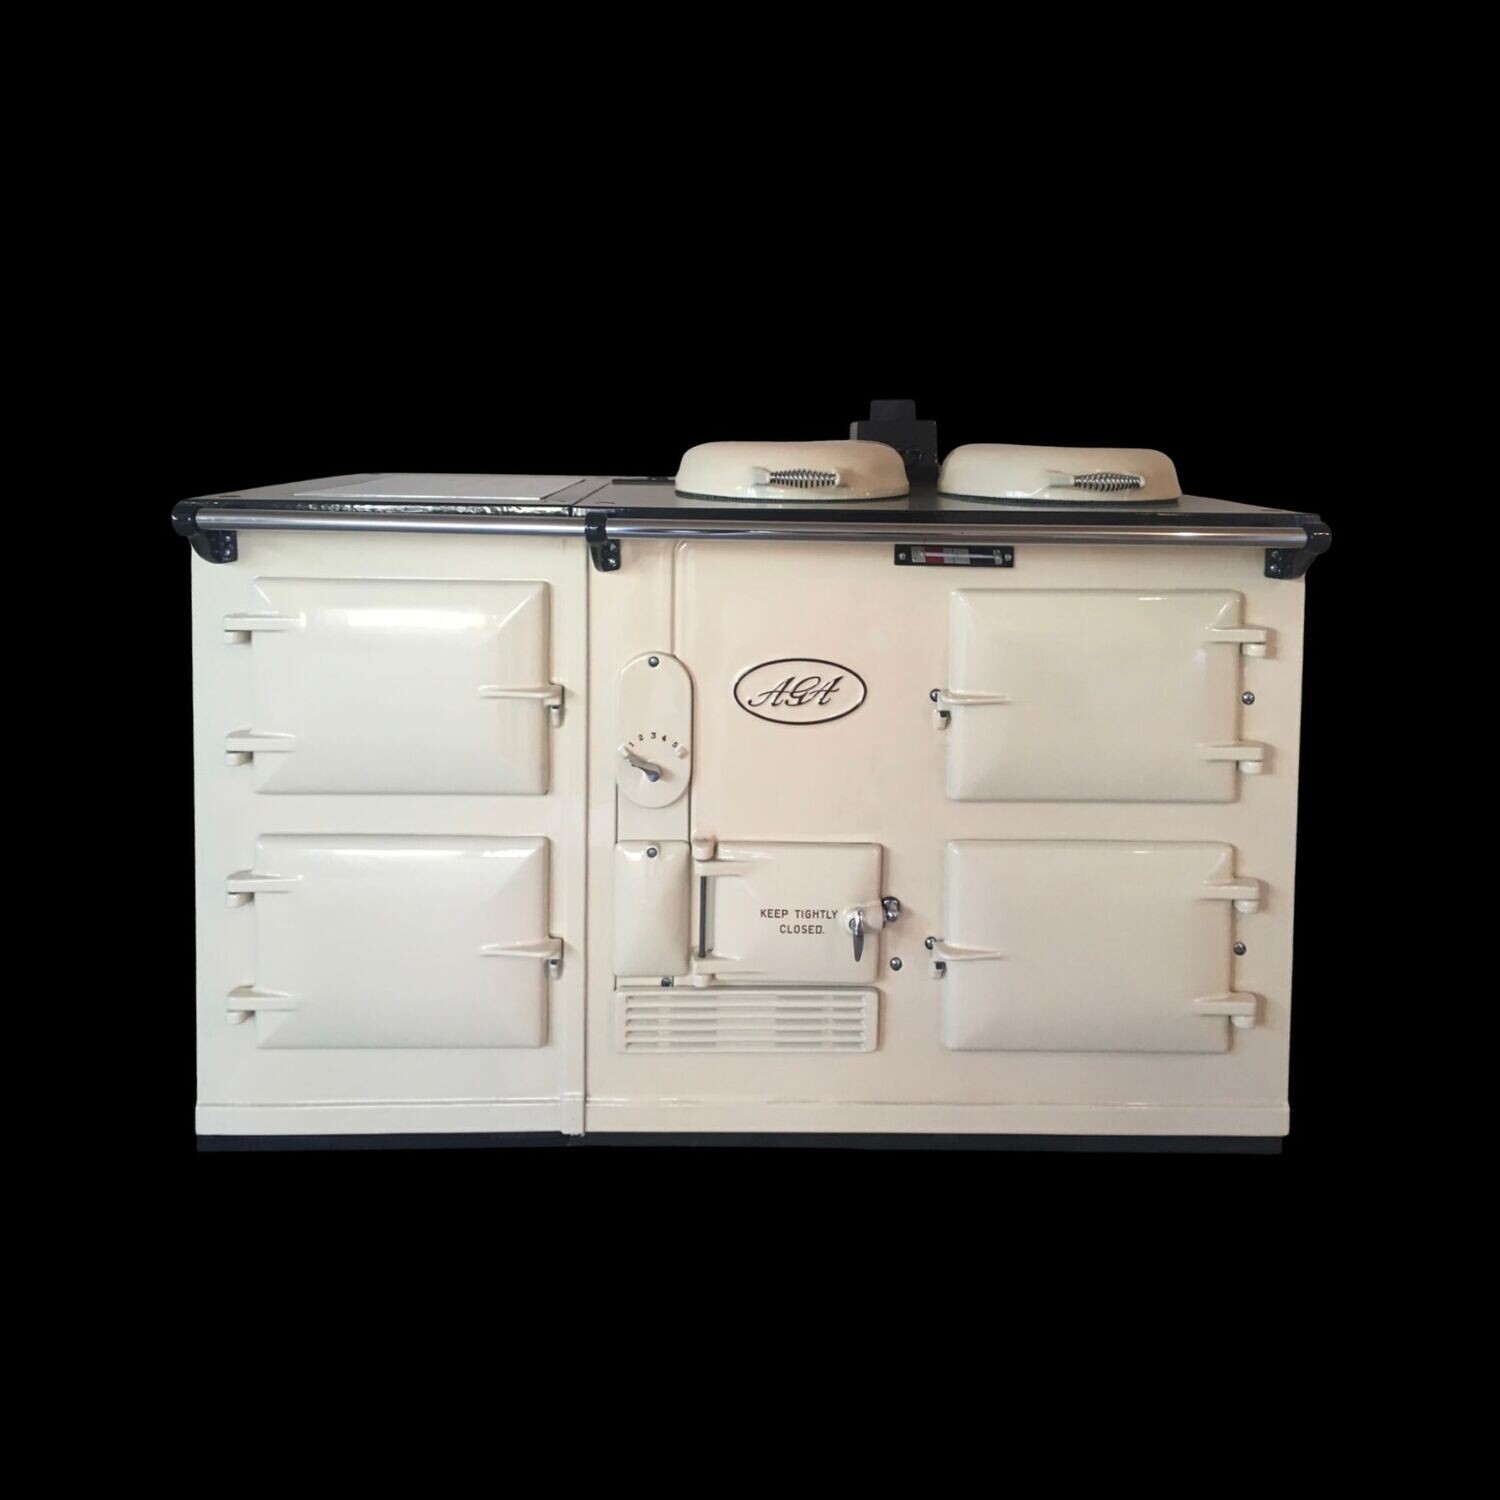 Reconditioned 4 Oven eControl Aga Cooker (Trad Model, Any Colour)